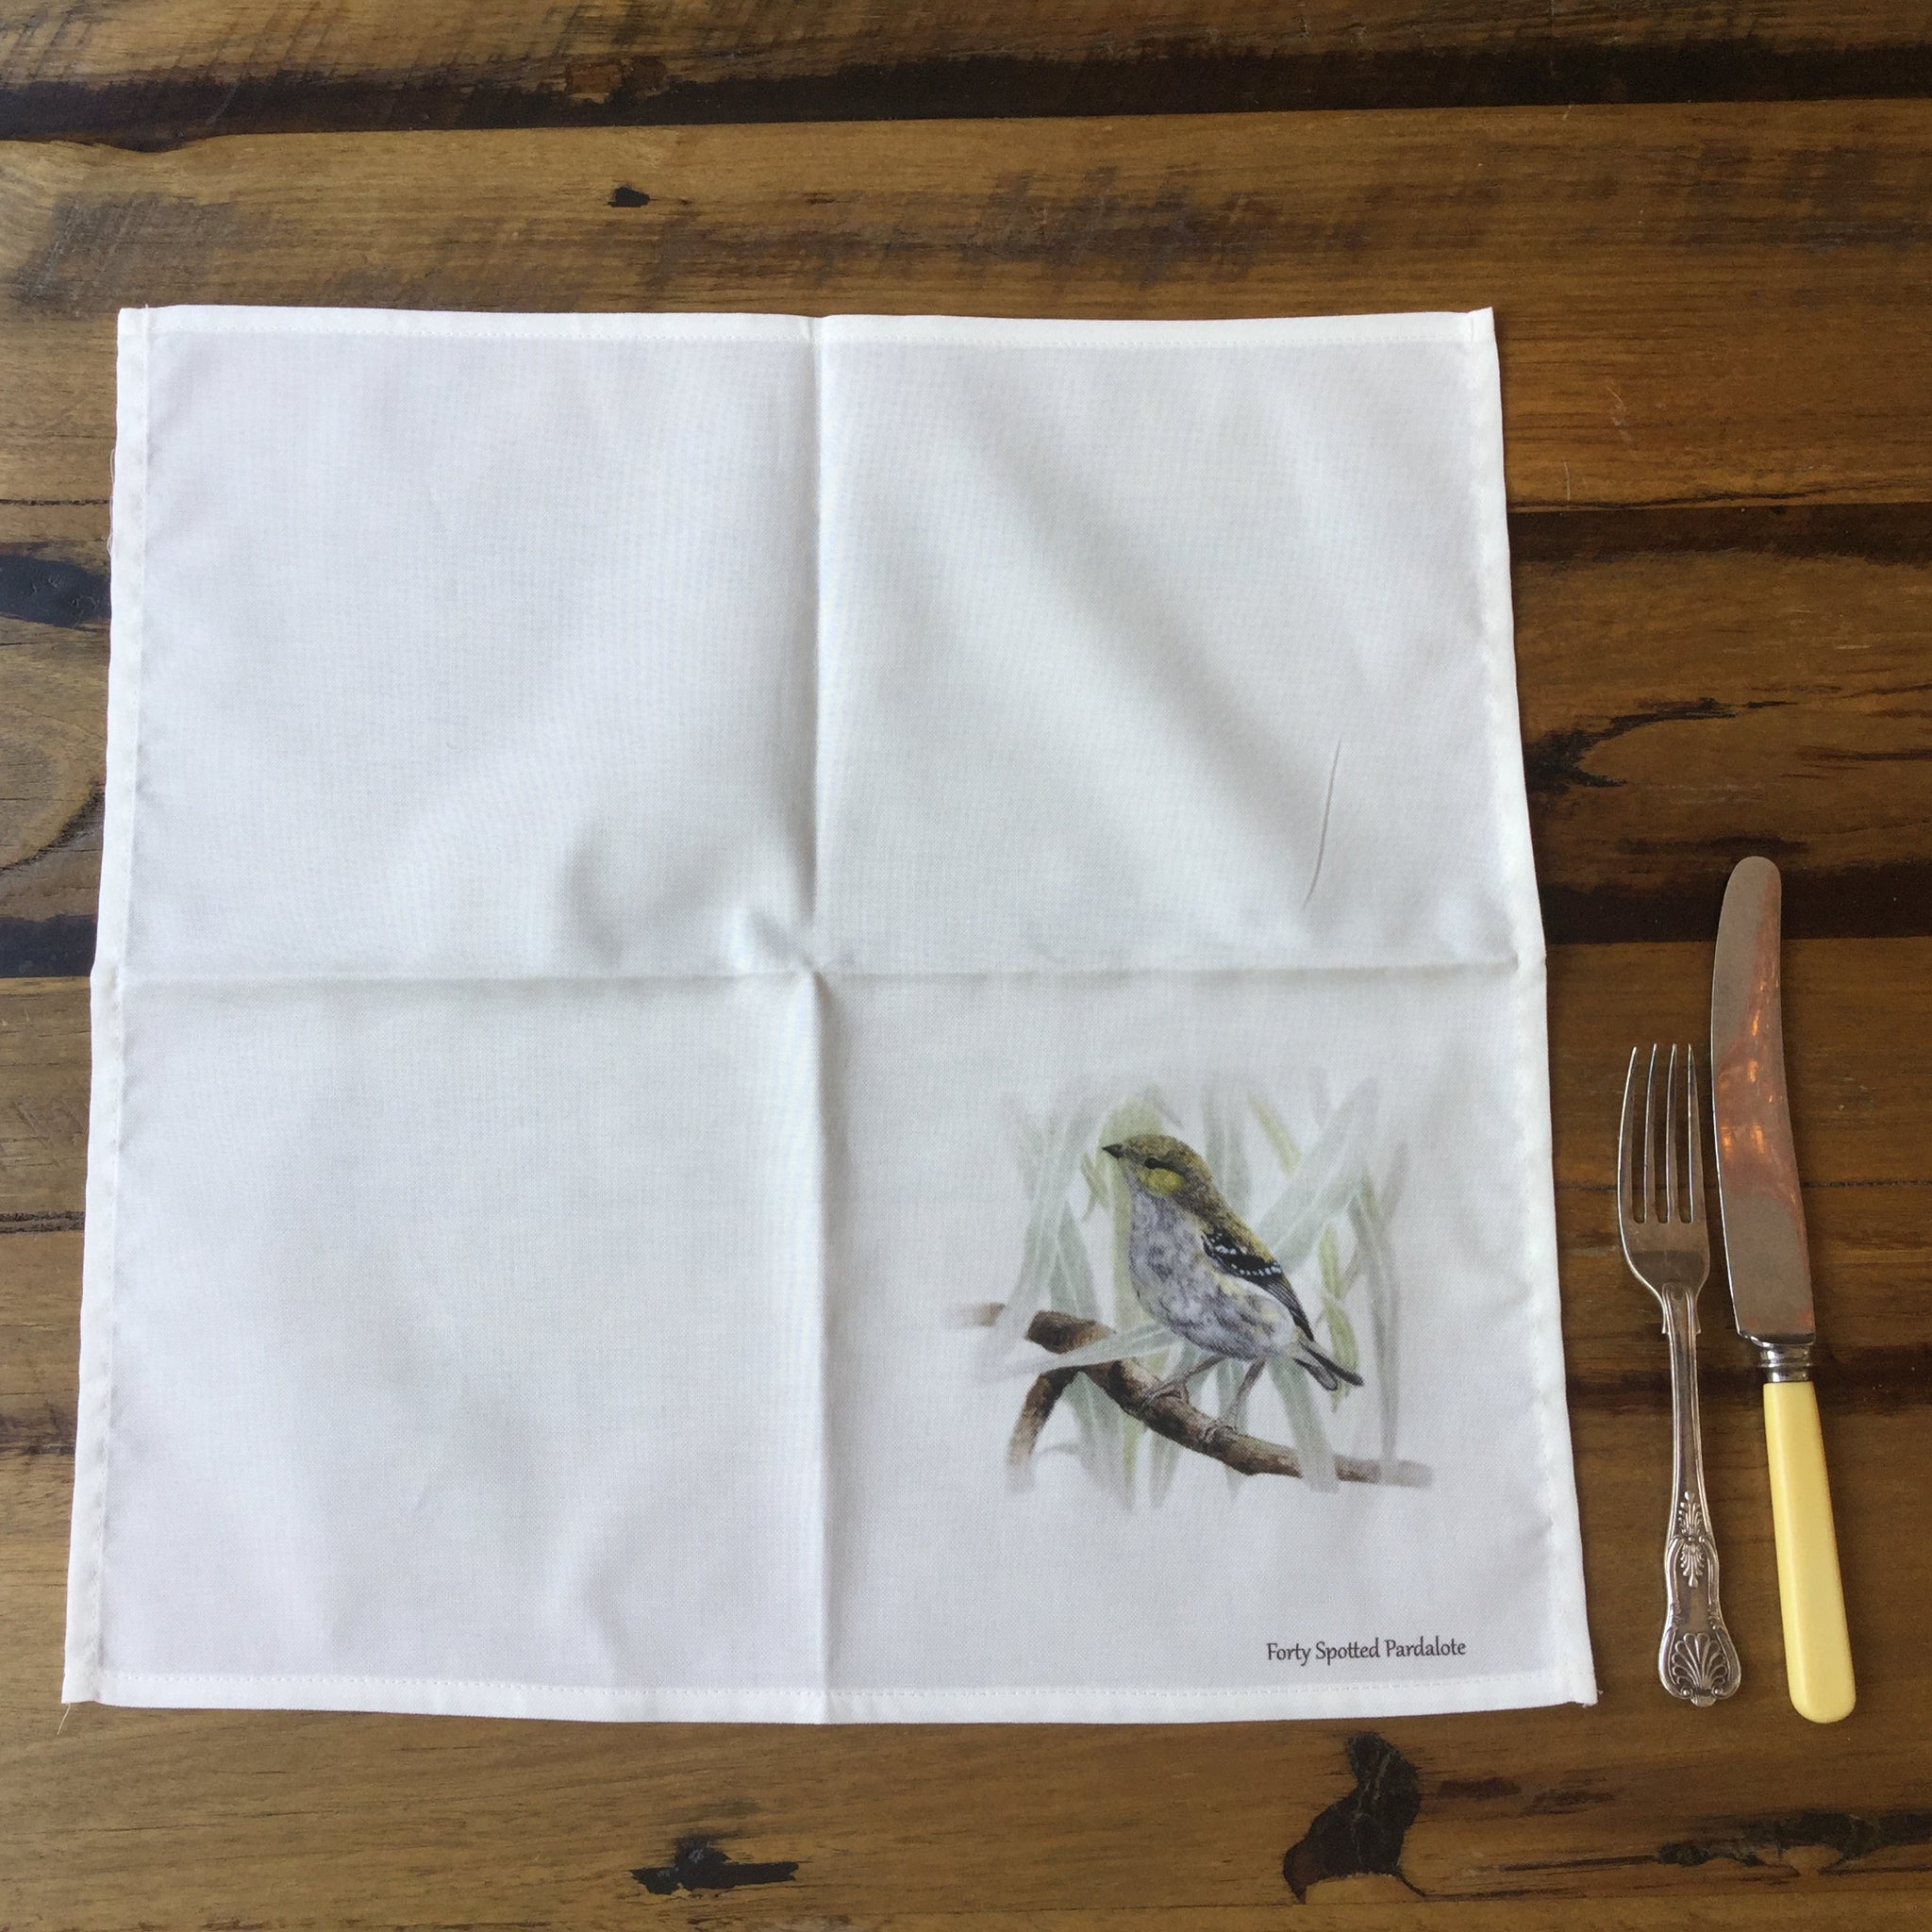 Cloth napkins and serviettes with the Forty Spotted Pardalote